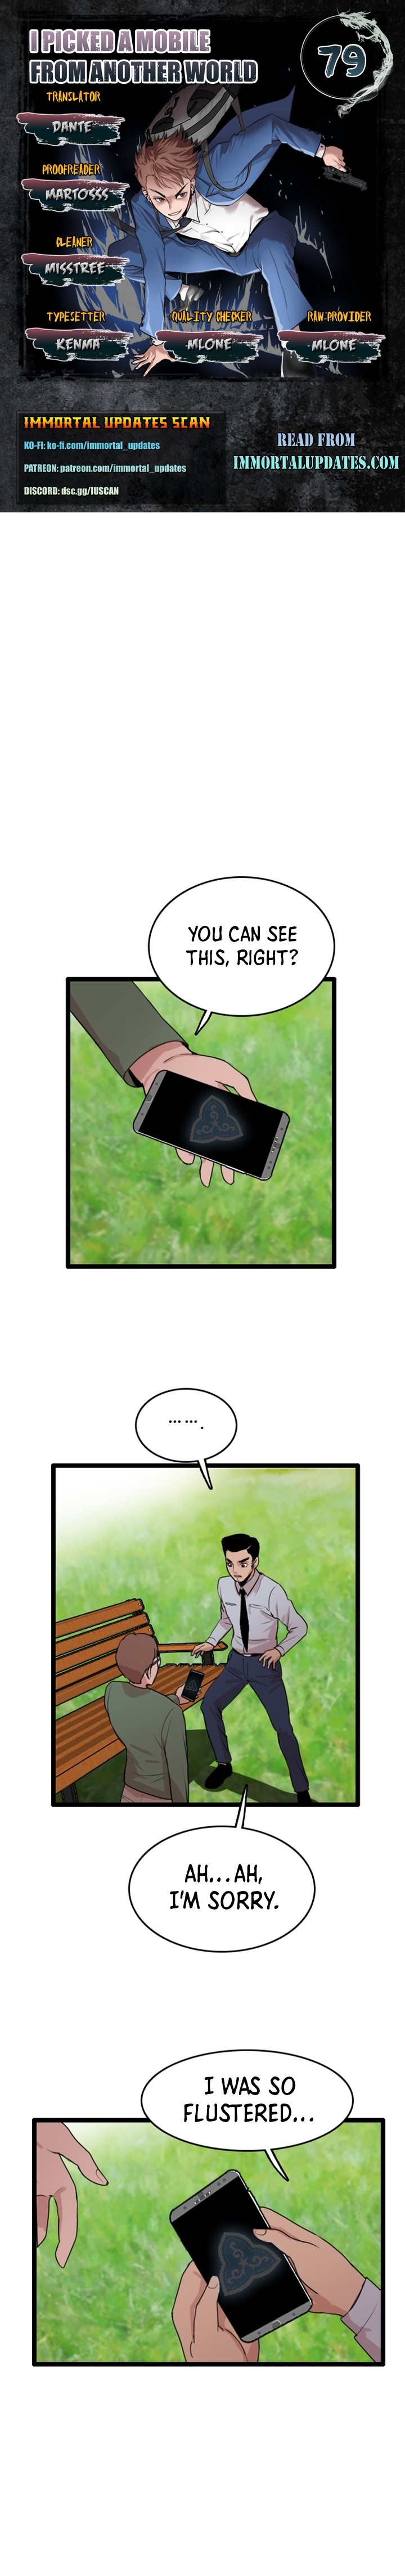 I Picked A Mobile From Another World - Page 2